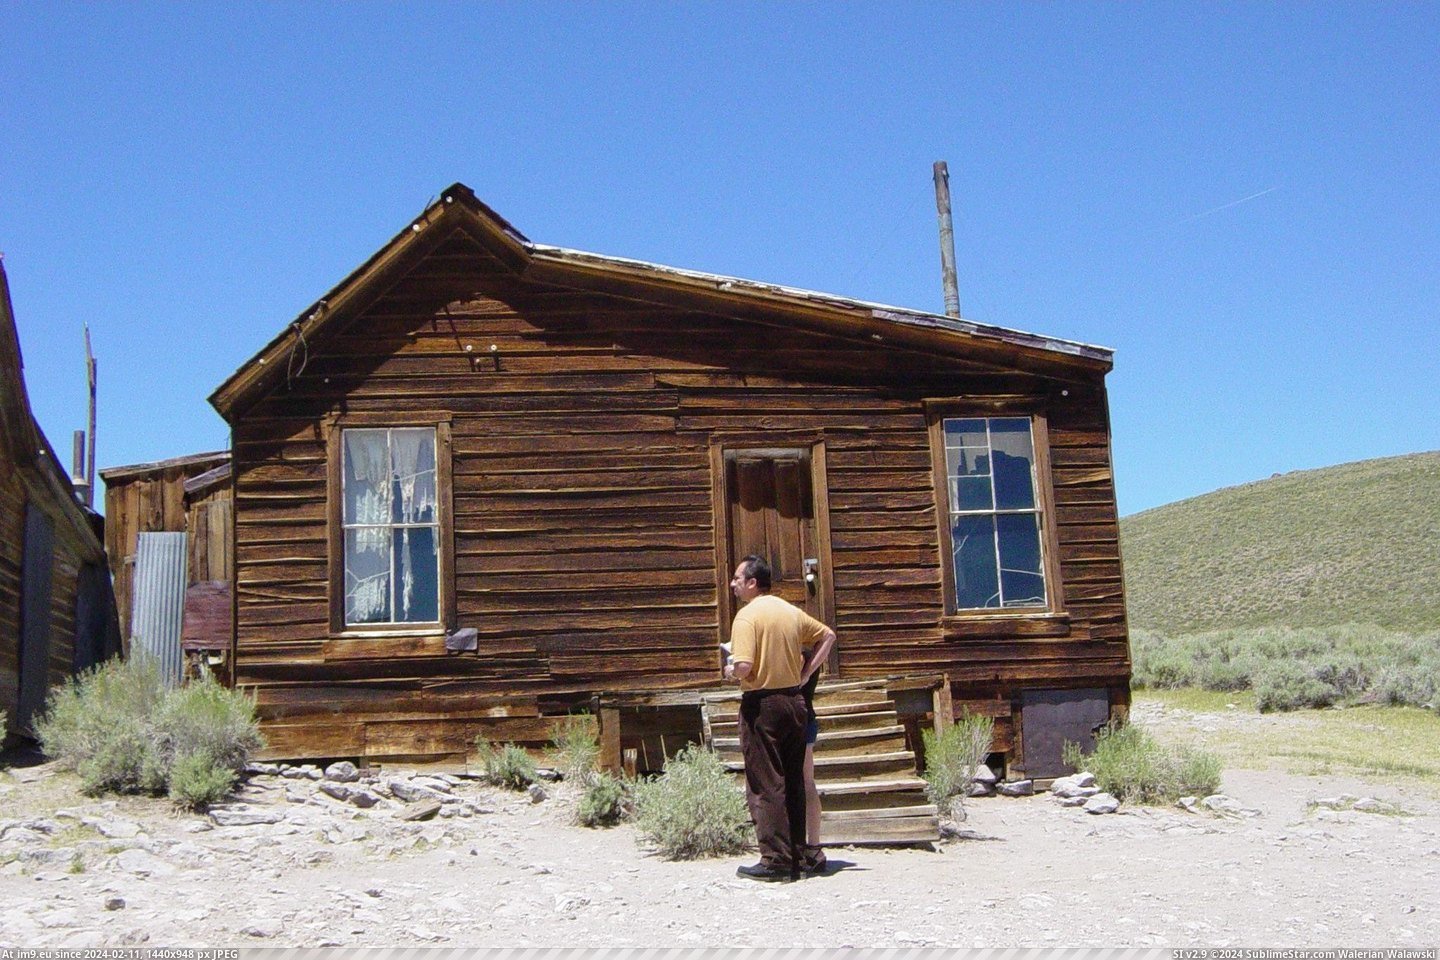 #California #House #Lester #Bell #Bodie Lester E. Bell House In Bodie, California Pic. (Изображение из альбом Bodie - a ghost town in Eastern California))